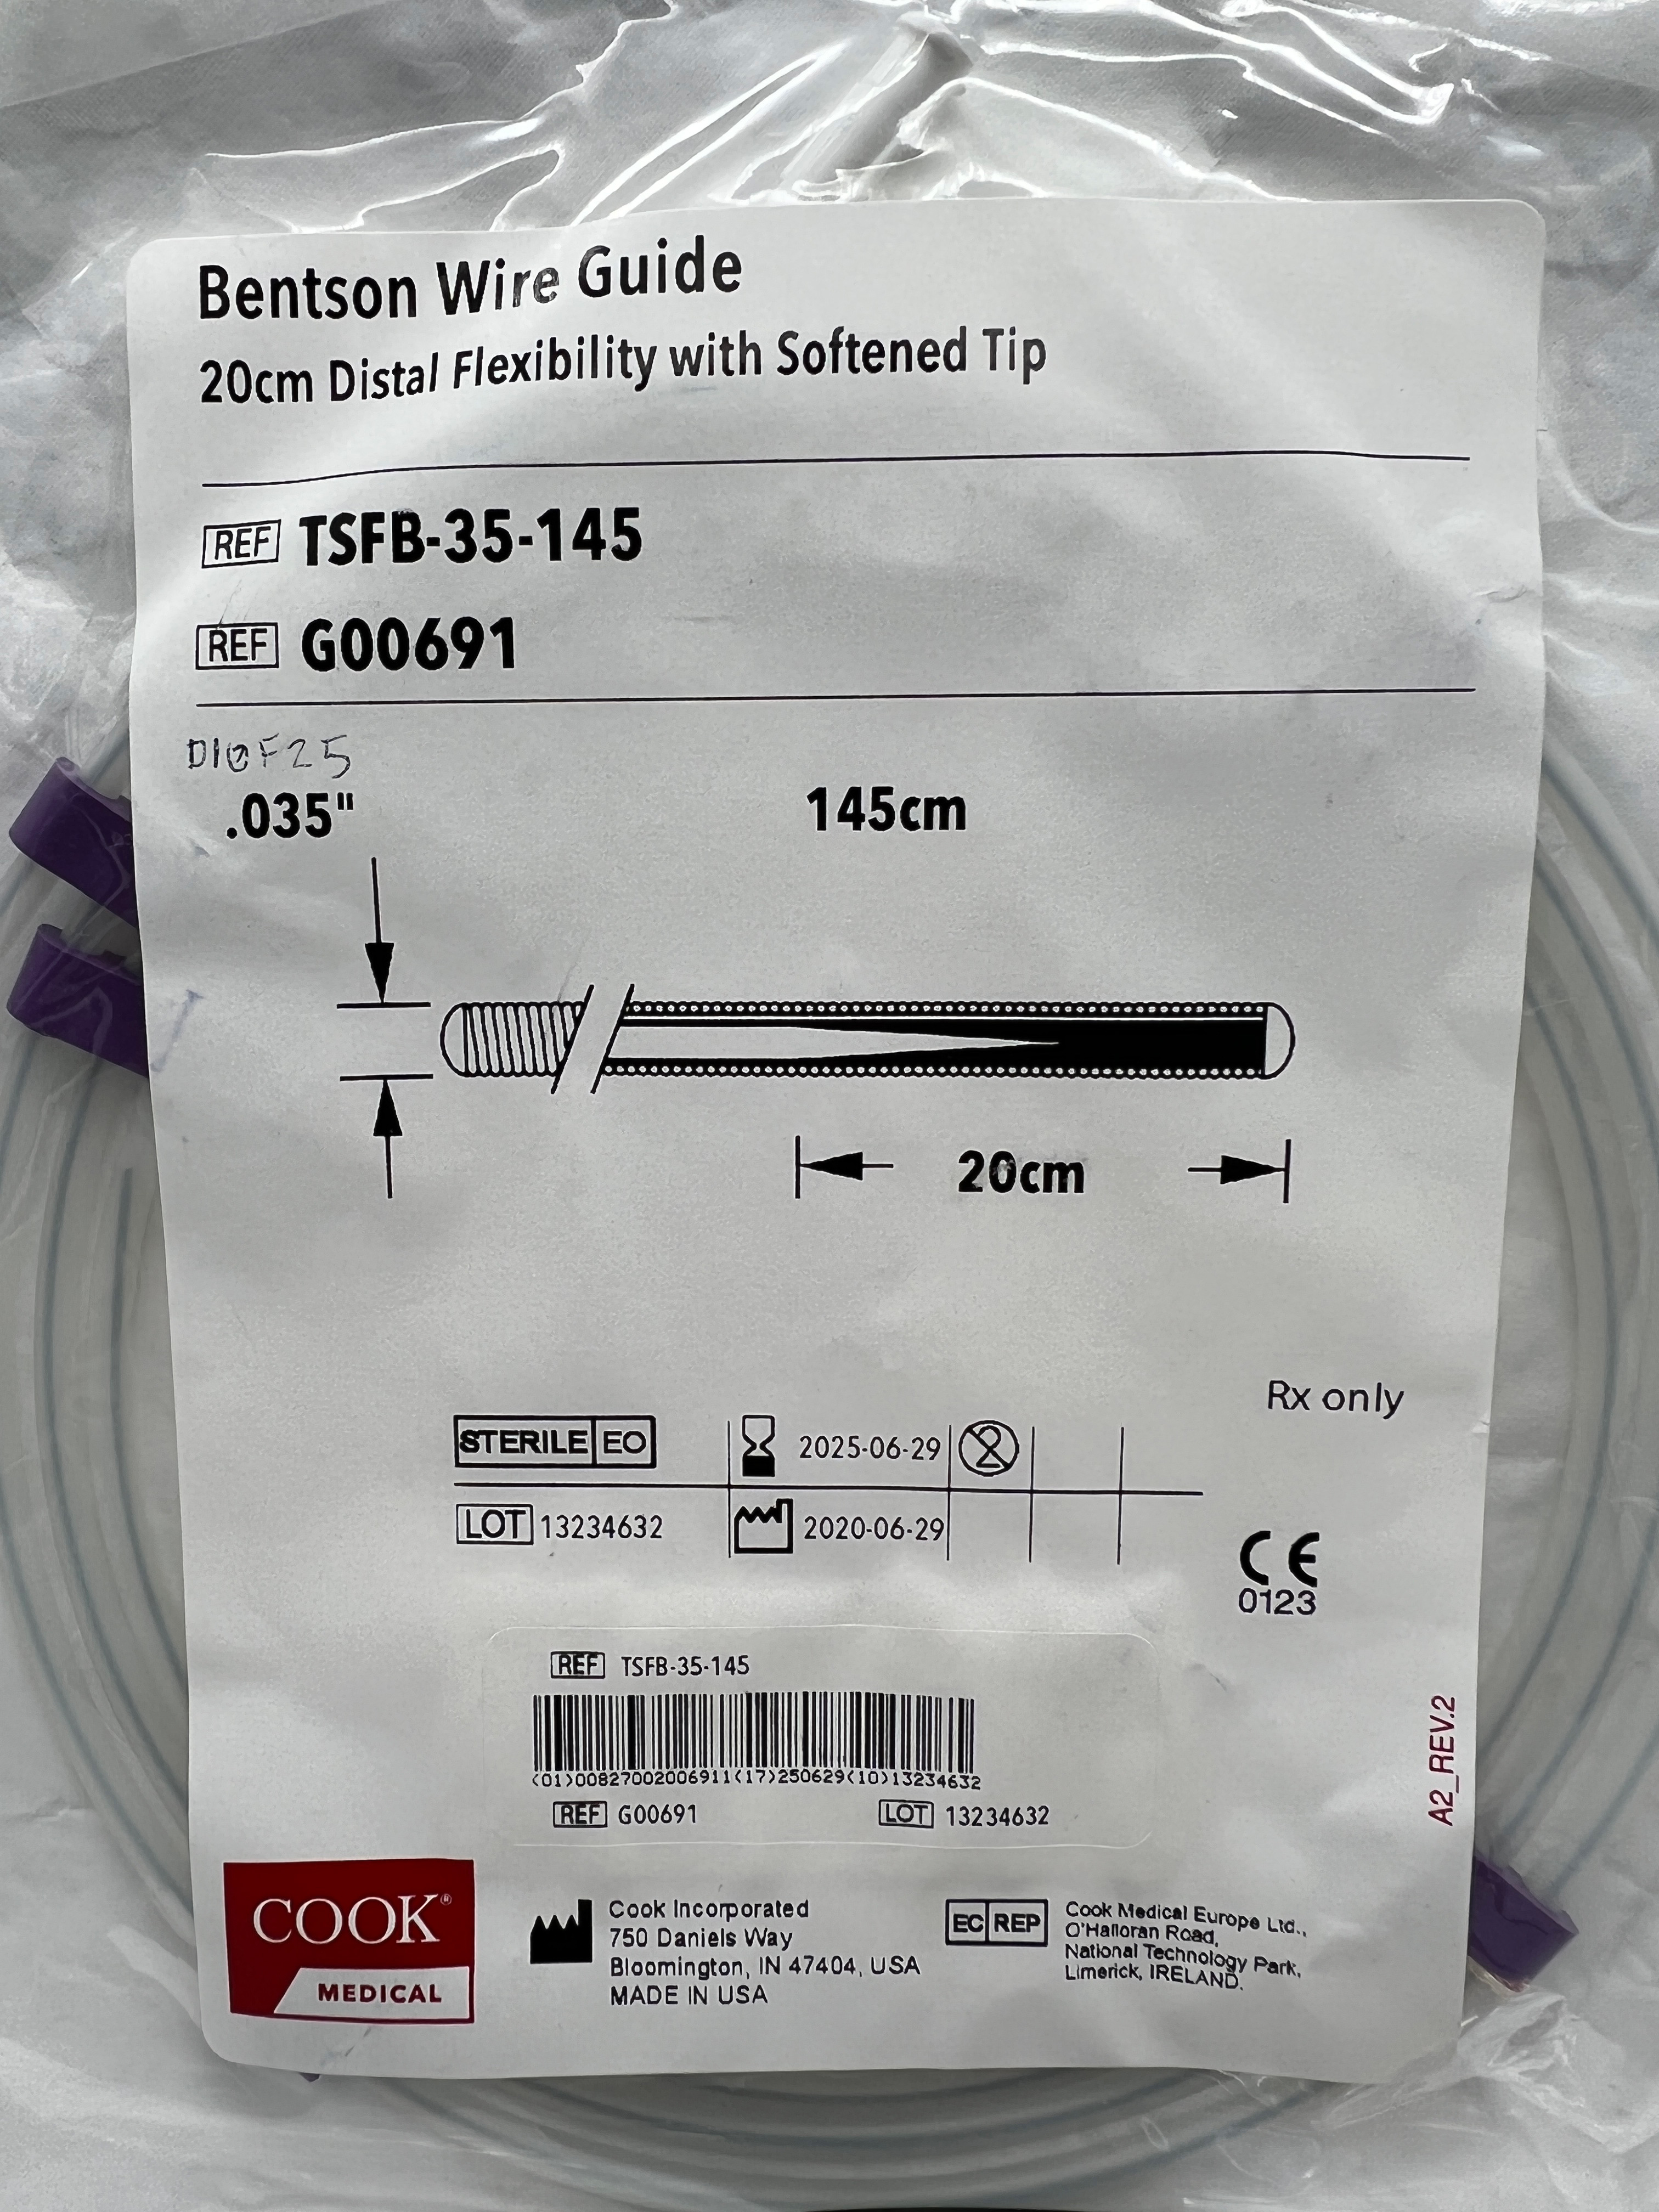 BENTSON WIRE GUIDE 20CM DISTAL FLEXIBILITY WITH SOFTENED TIP